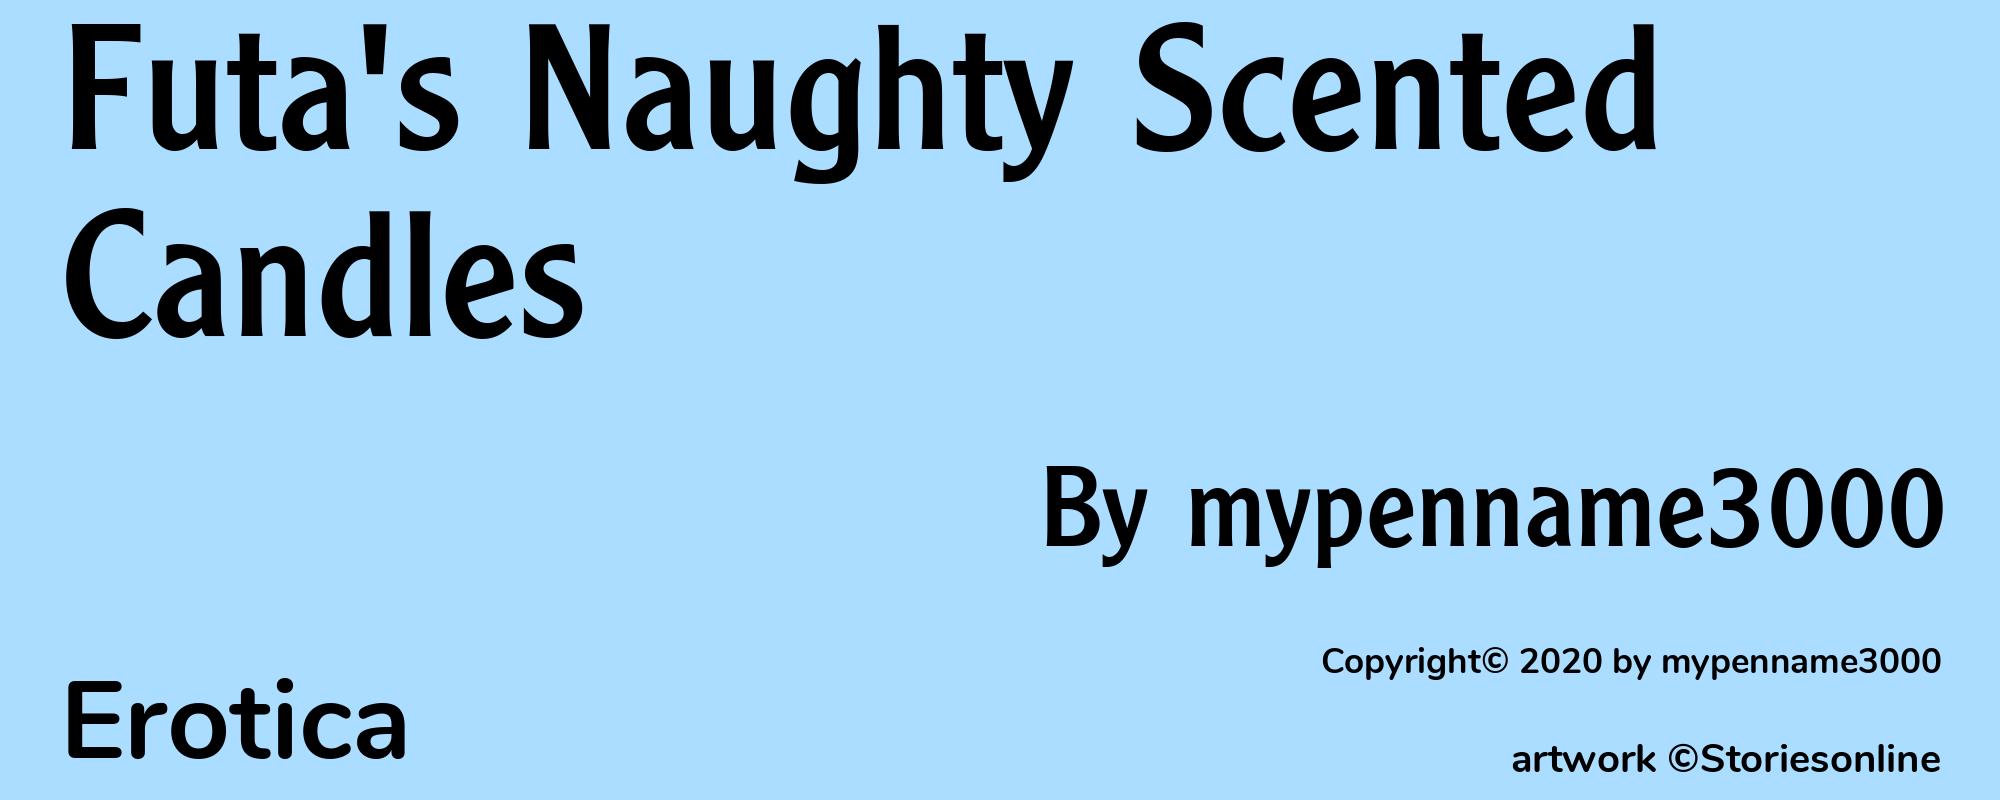 Futa's Naughty Scented Candles - Cover